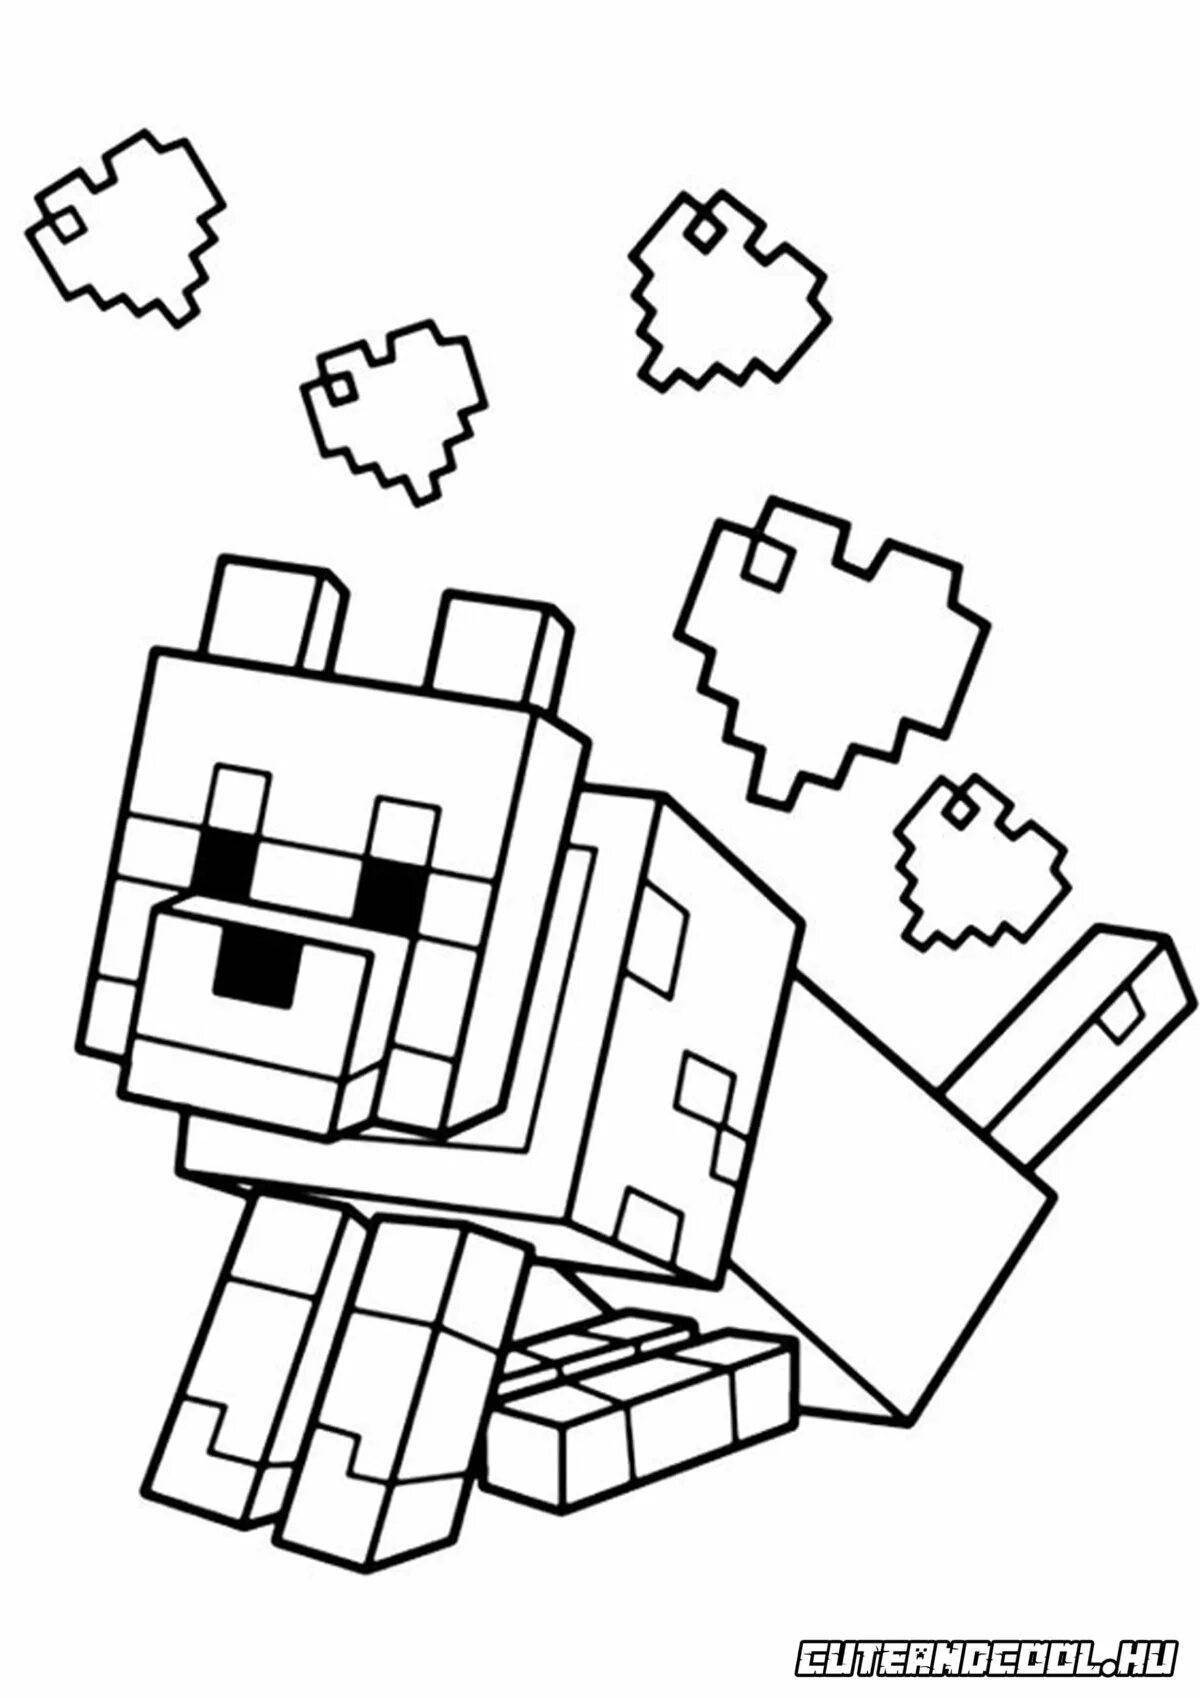 Playful minecraft dungeons coloring page